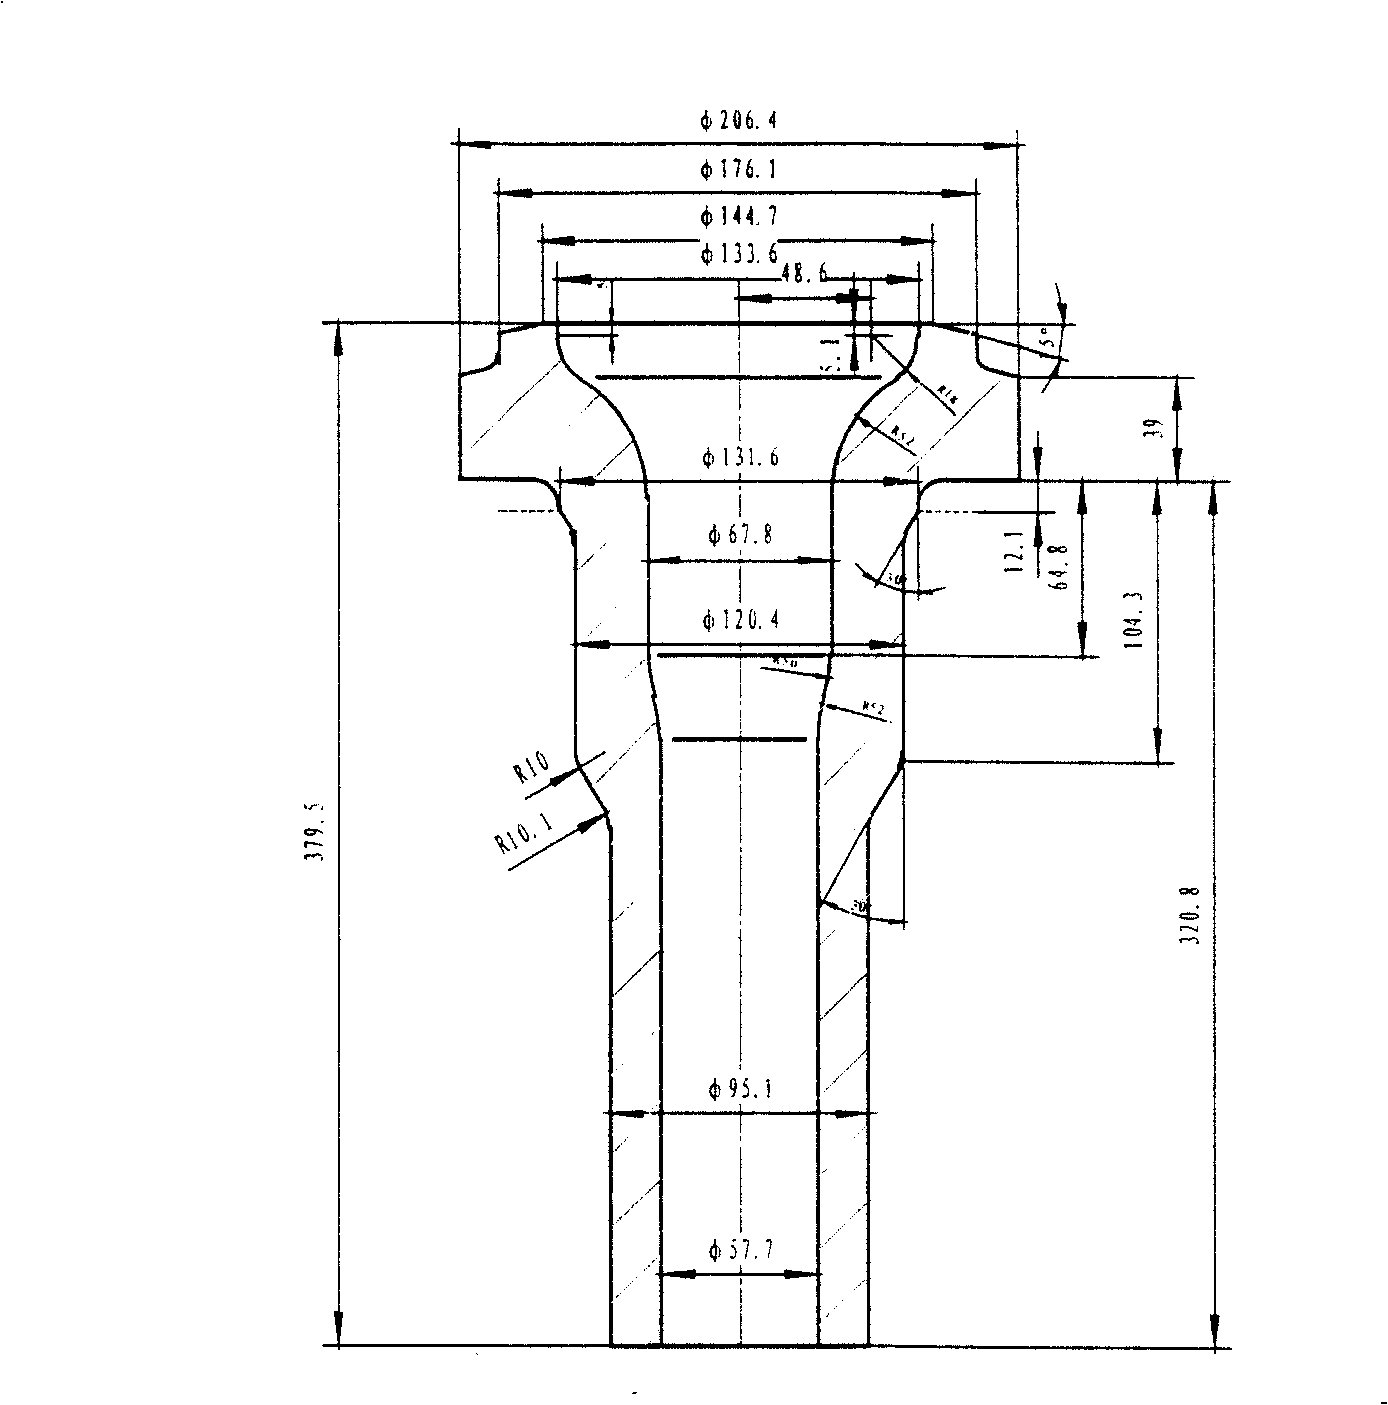 Fast precise semi-axle casing extruding formation process